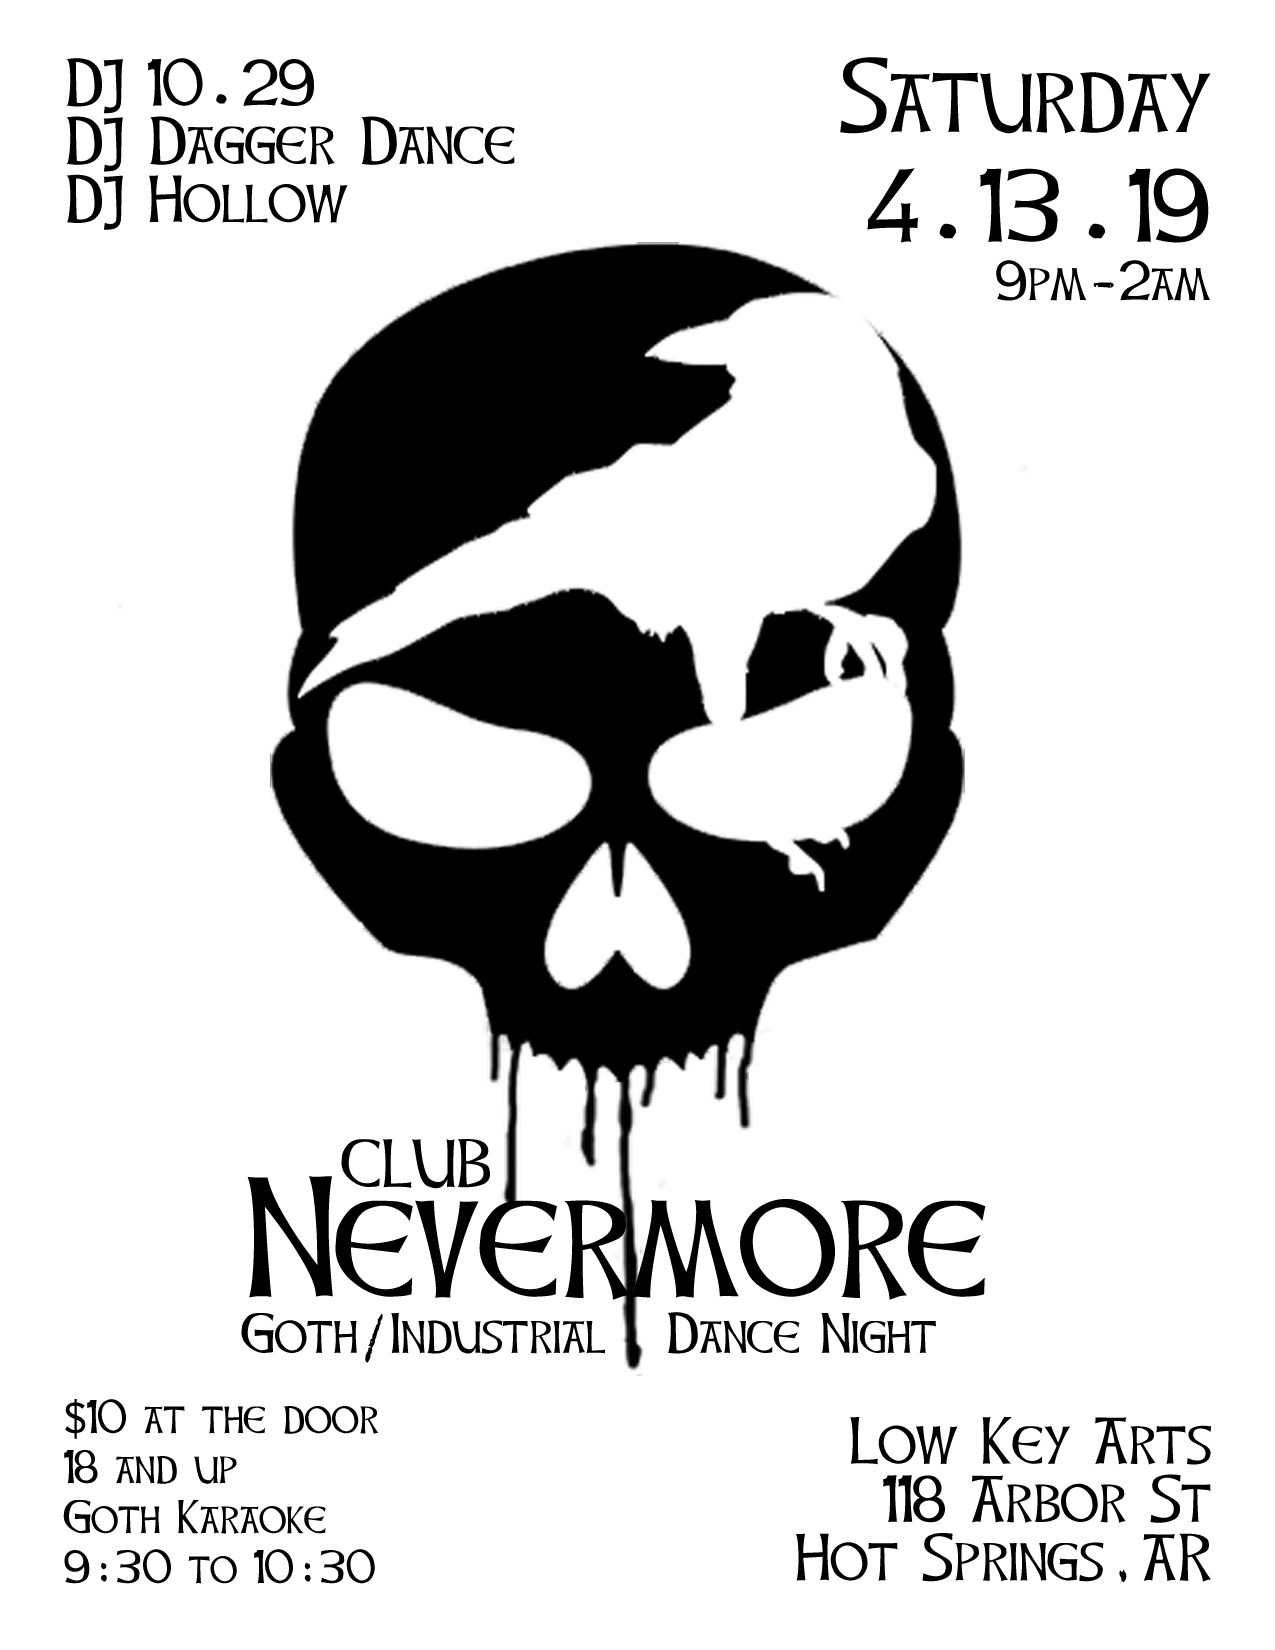 Flyer for Club Nevermore, Arkansas&rsquo;s new goth night. Saturday, April 13th at Low Key Arts, 118 Arbor Street in Hot Springs, Arkansas.